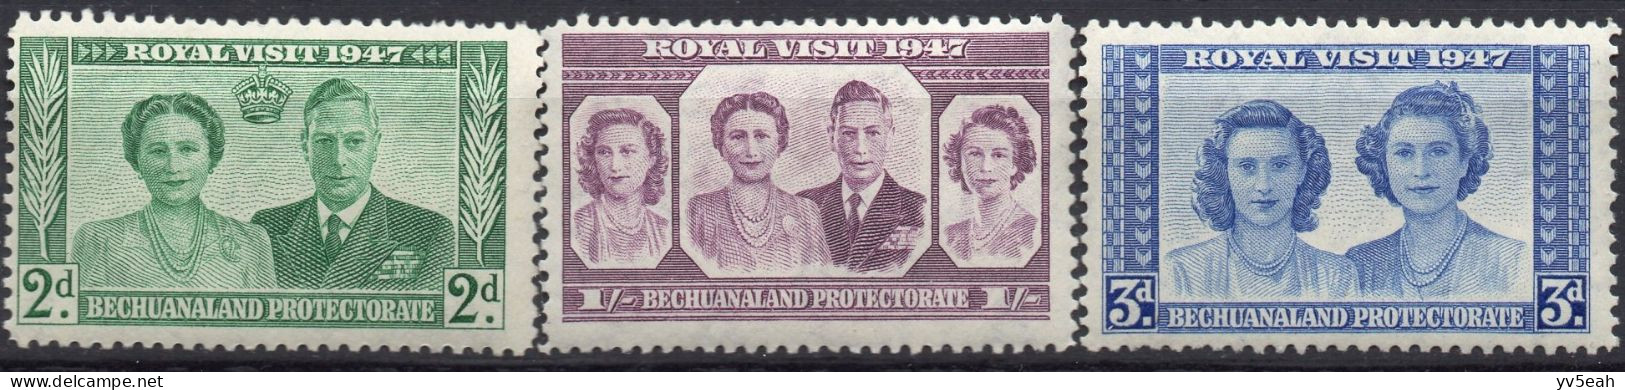 BECHUANALAND PROTECTORATE/1947/MNH/SC#144-6/KING GEORGE VI/ KGVI /ROYAL FAMILY VISIT ISSUED / PARTIAL SET - 1885-1964 Protectorat Du Bechuanaland